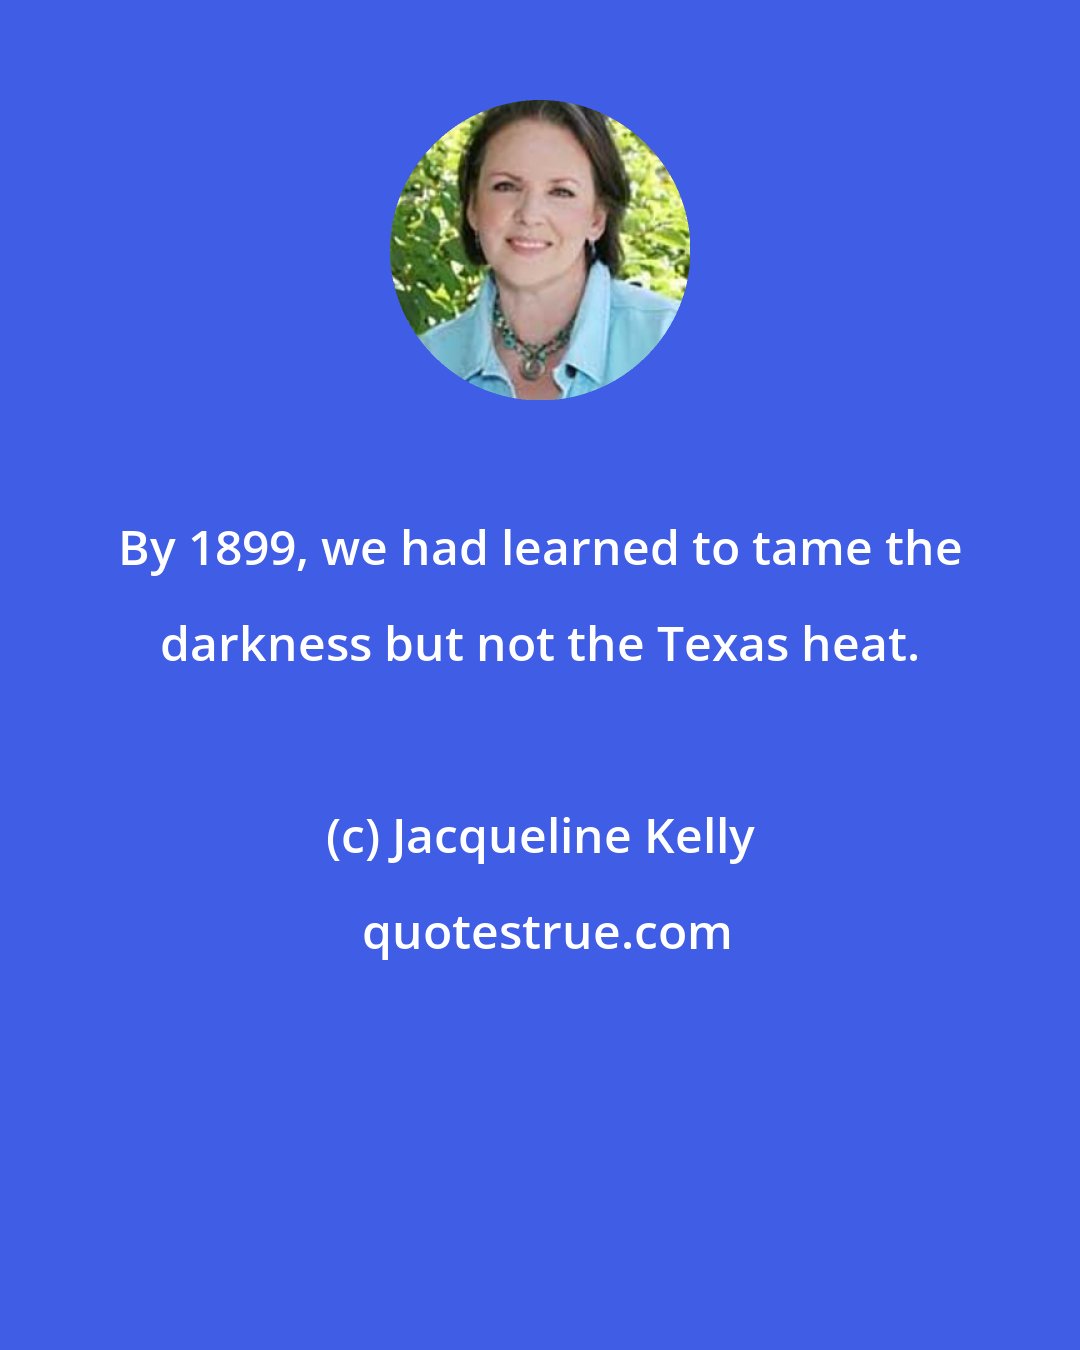 Jacqueline Kelly: By 1899, we had learned to tame the darkness but not the Texas heat.